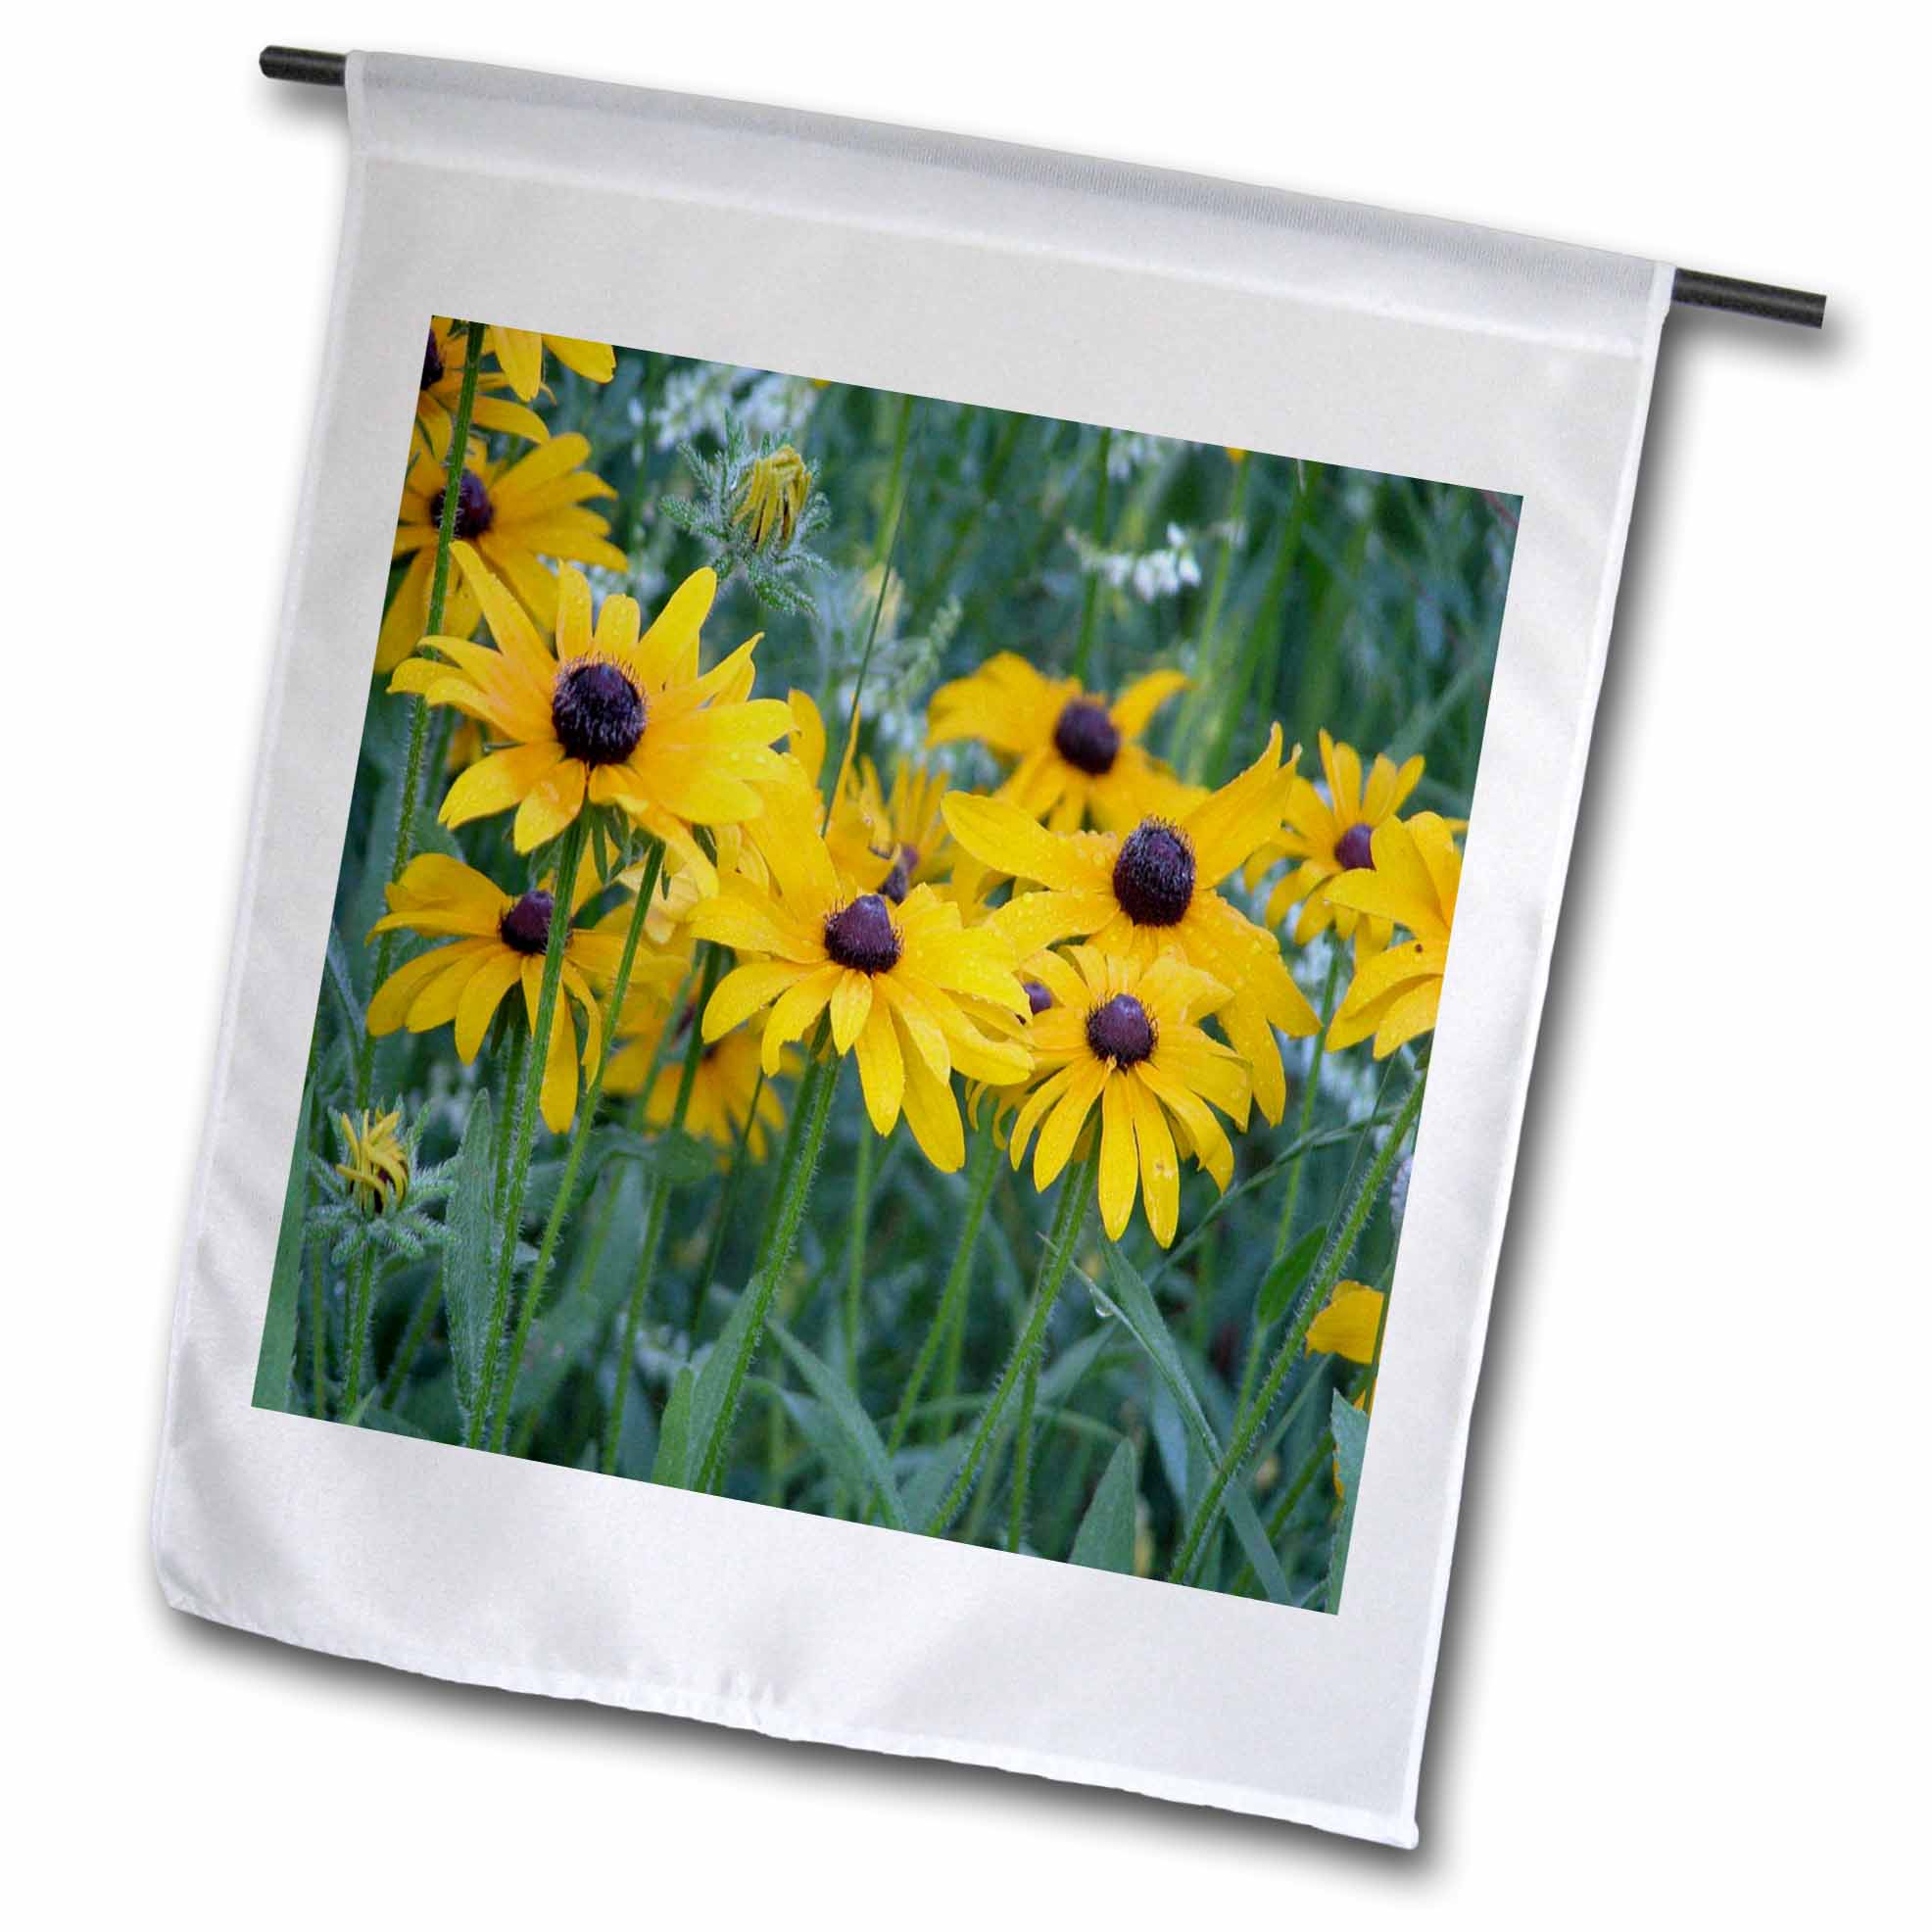 3dRose Black eyed Susans in the Garden - Garden Flag, 12 by 18-inch - image 1 of 1